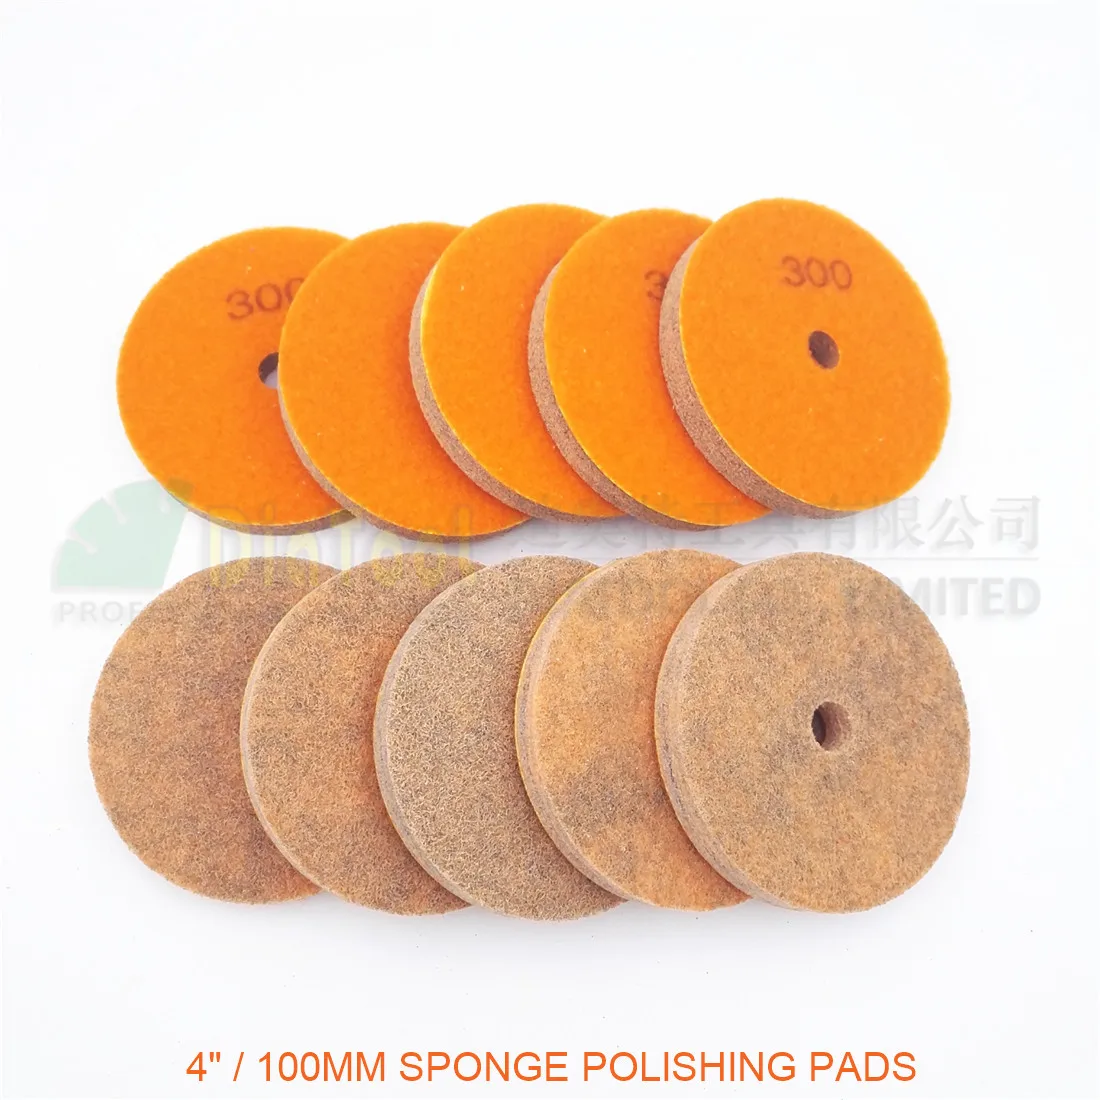 DIATOOL 10pcs 4inches Diamond Sponge Polishing Pads For Soft Stone Marble Artificial Stone Terrazzo Grit #300 Diameter 100MM dt diatool 1pc 5 8 11 thread dia18mm laser welded diamond dry drilling core bits drill granite marble nature stone hole saw